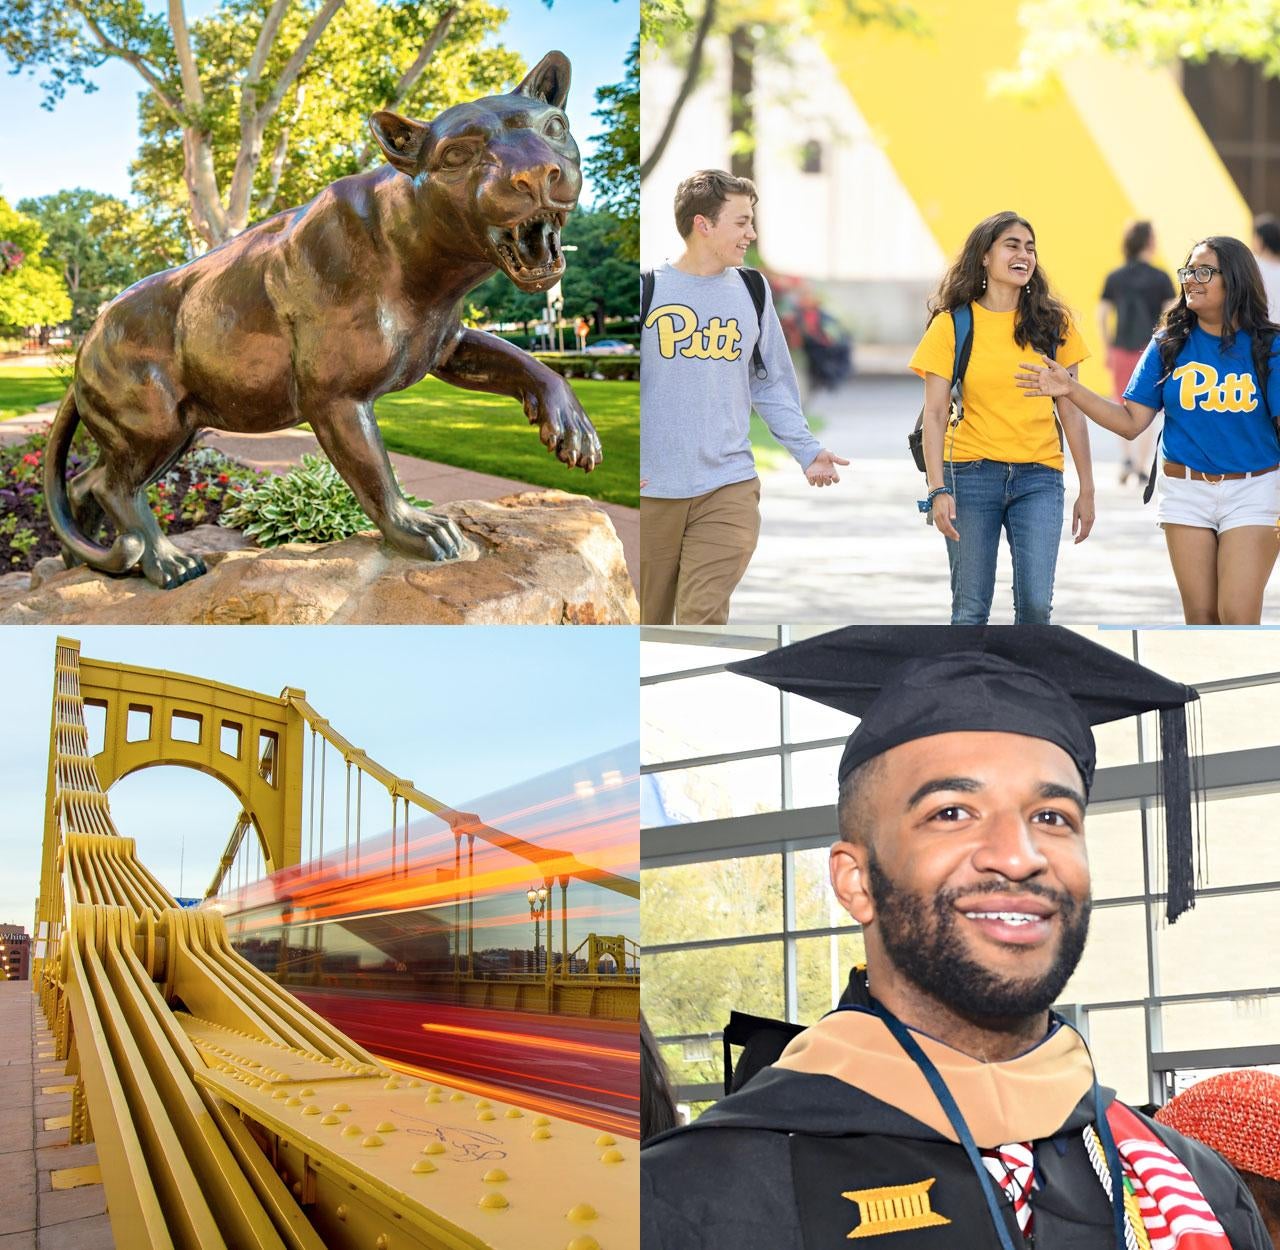 4 image collage of campus and students